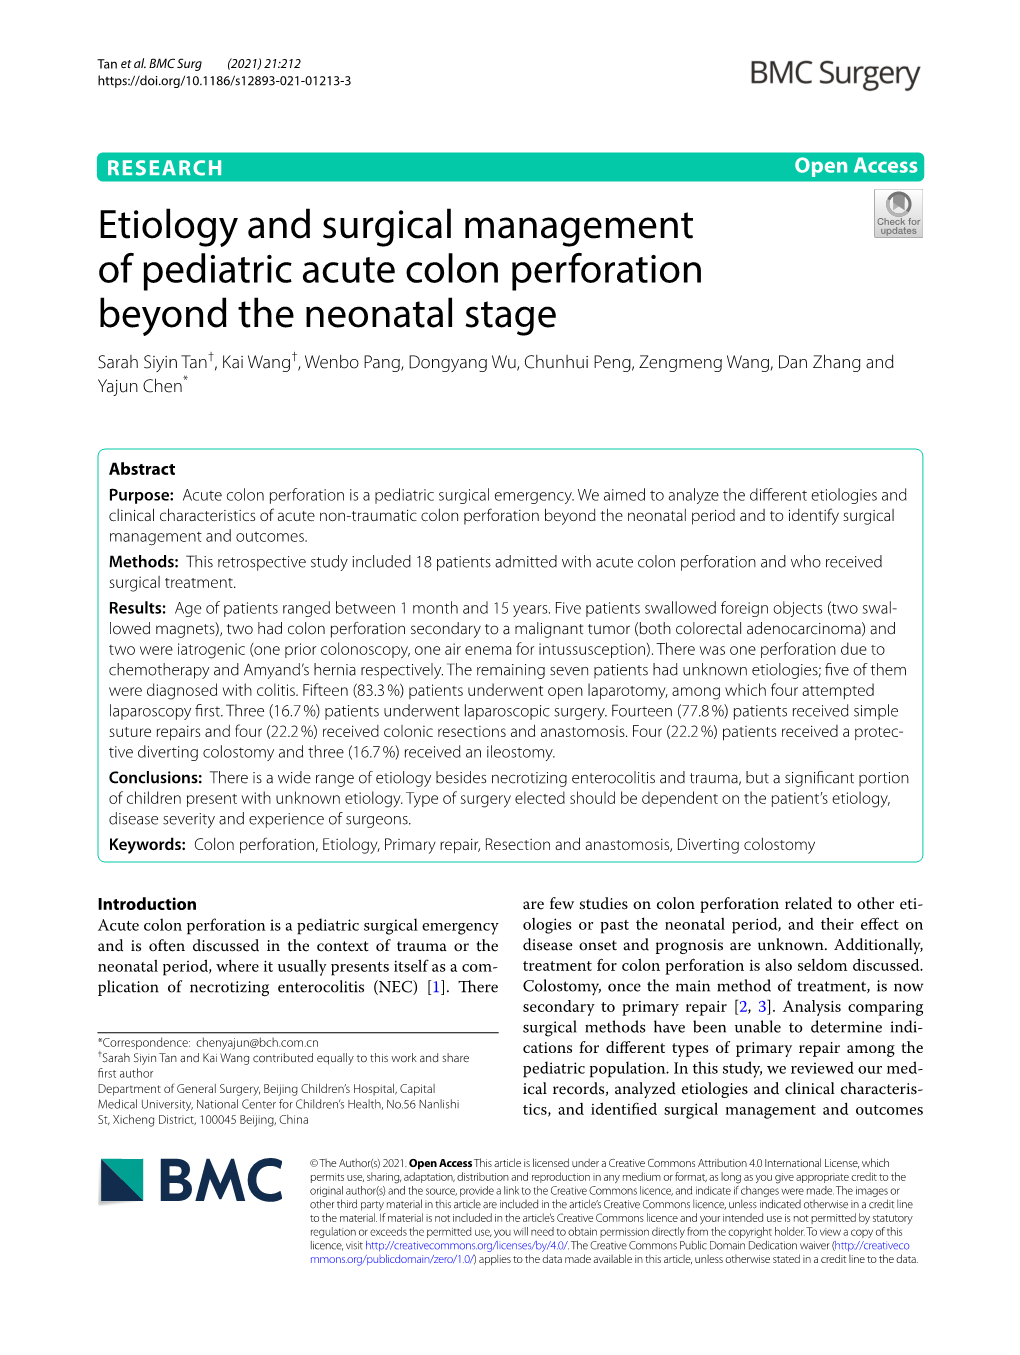 Etiology and Surgical Management of Pediatric Acute Colon Perforation